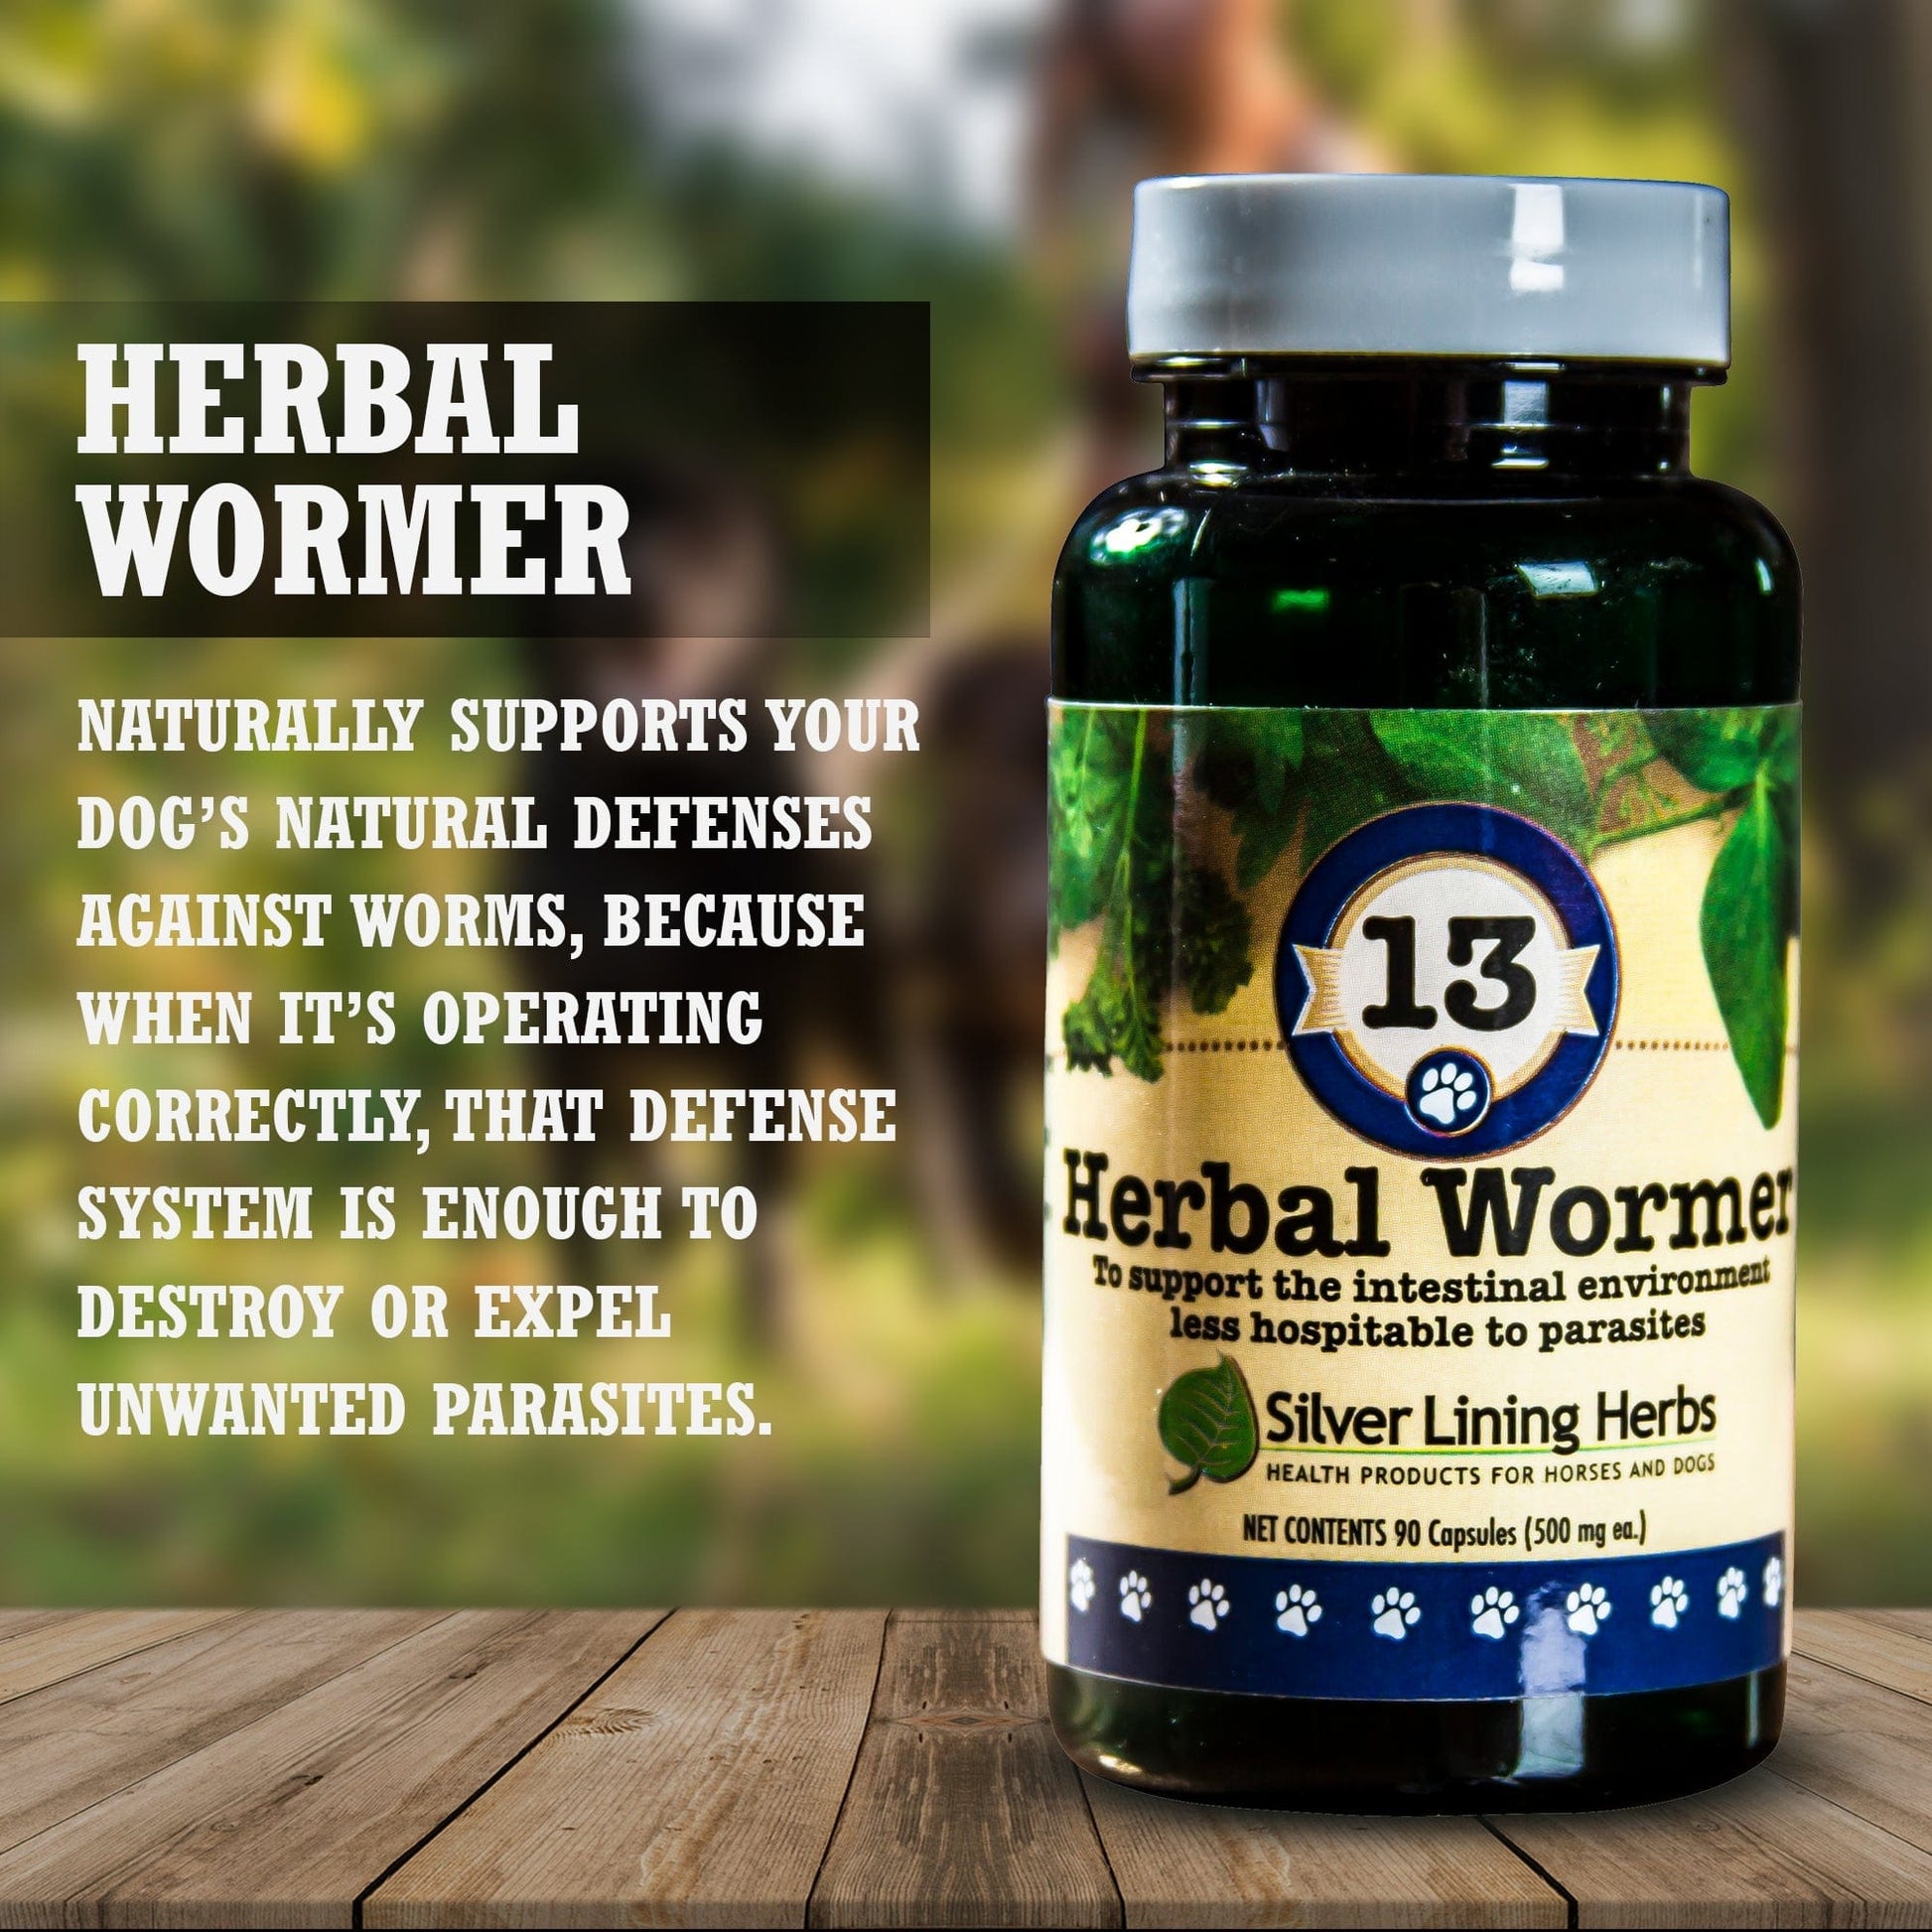 13 Herbal Wormer for Dogs - 90 Capsule - Silver Lining Herbs